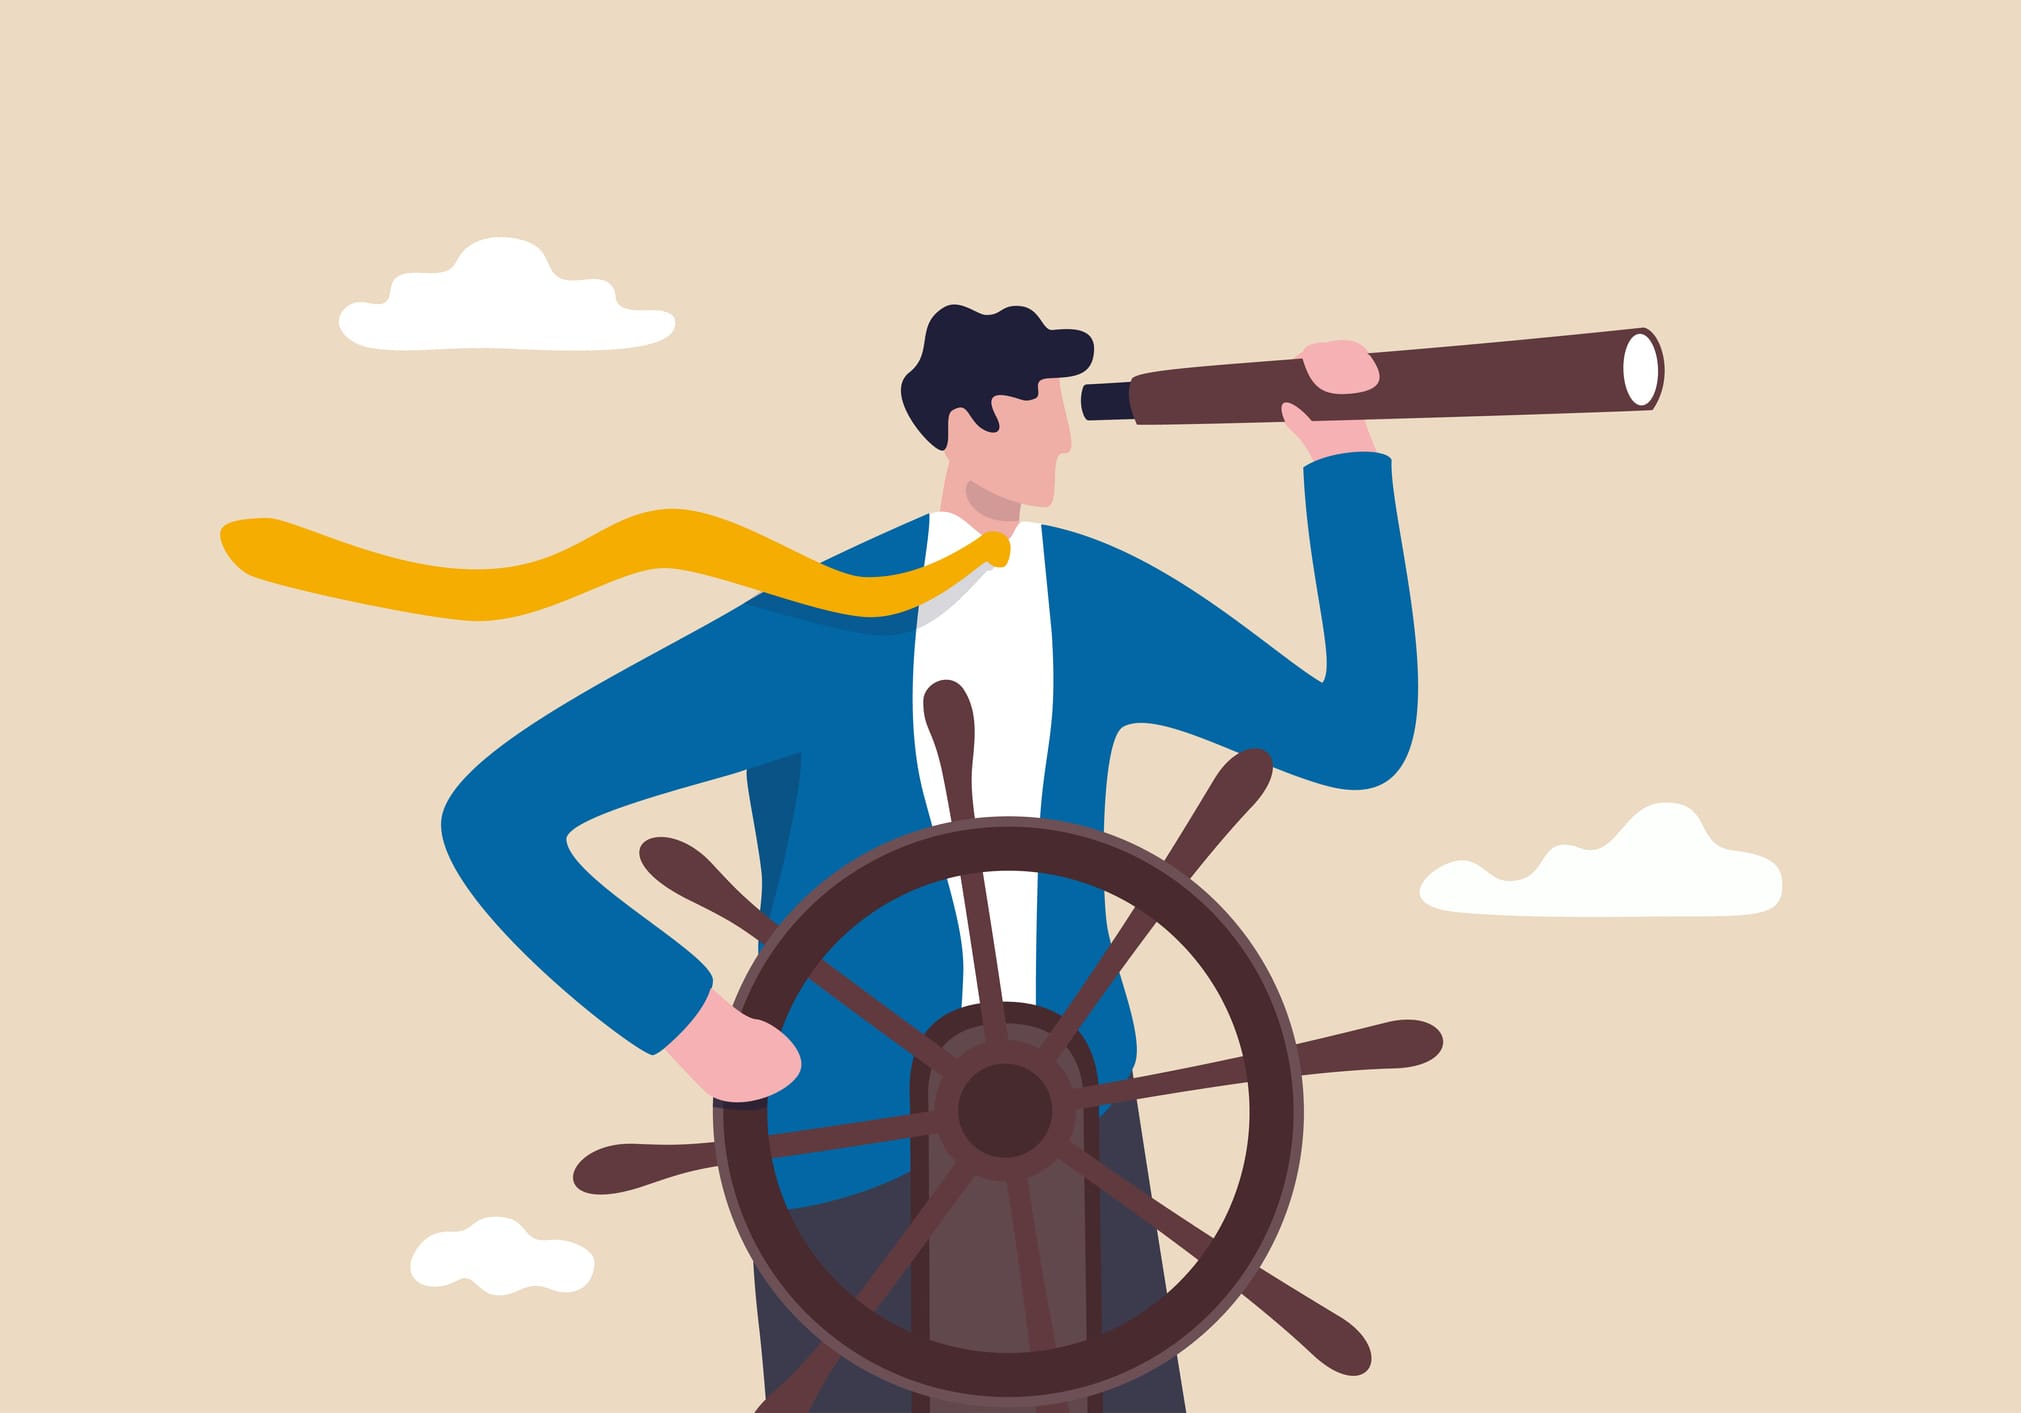 Illustration of a businessman in suit at steering wheel of ship looking through telescope.